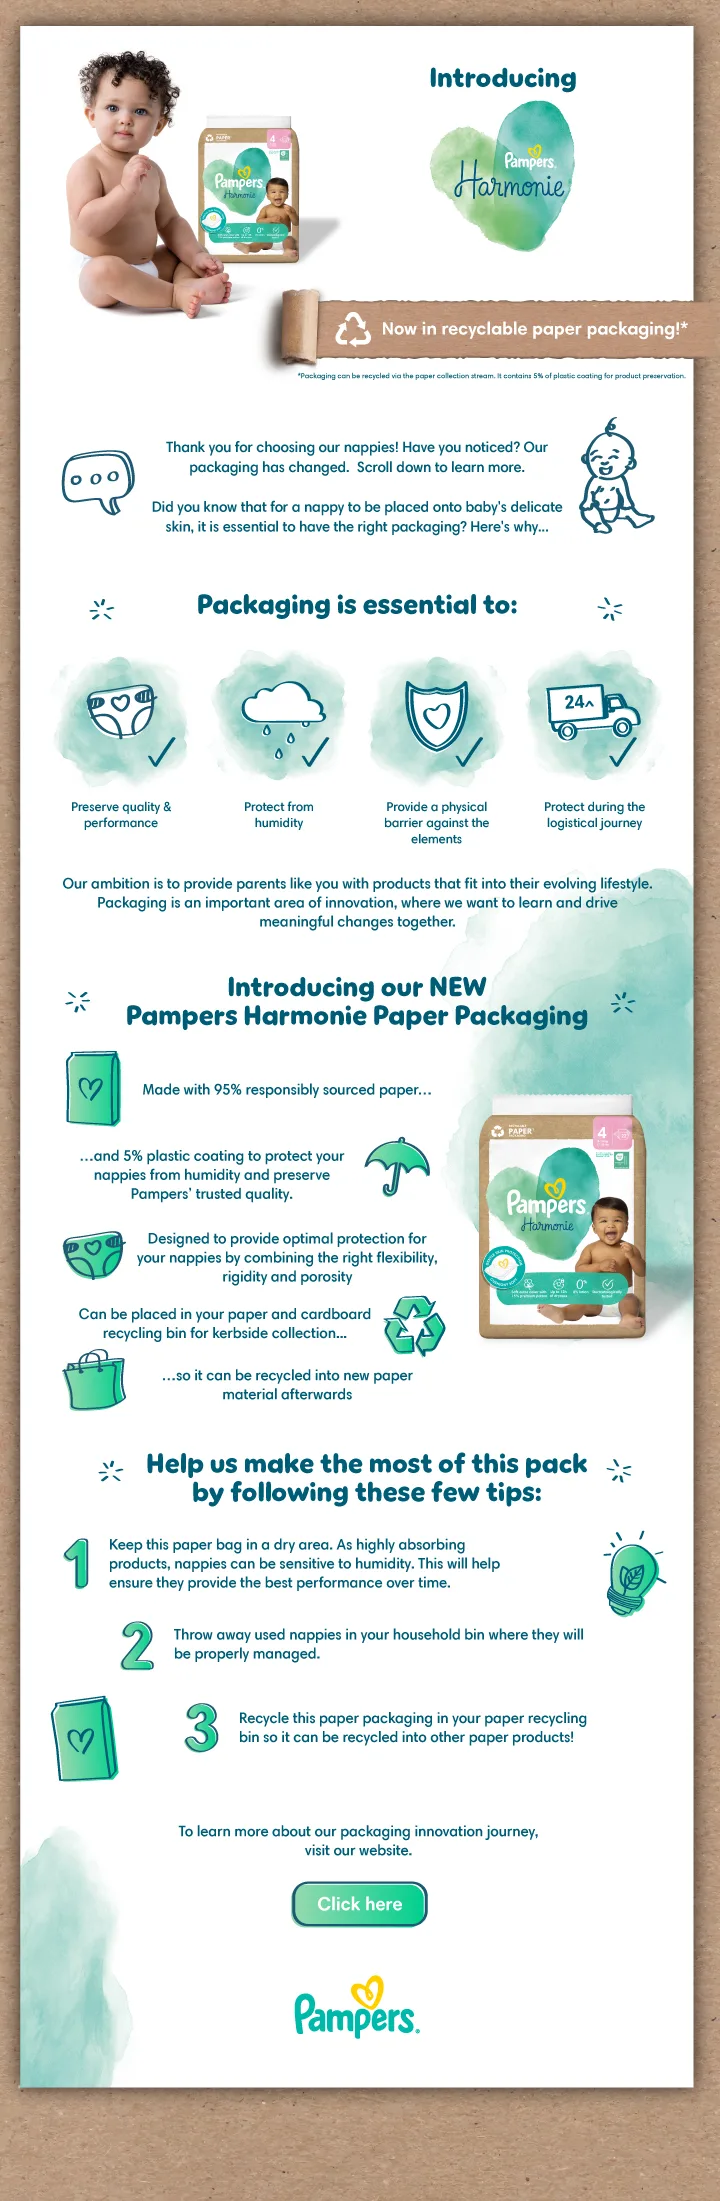 Pampers Harmonie nappies now available in recyclable paper packaging!